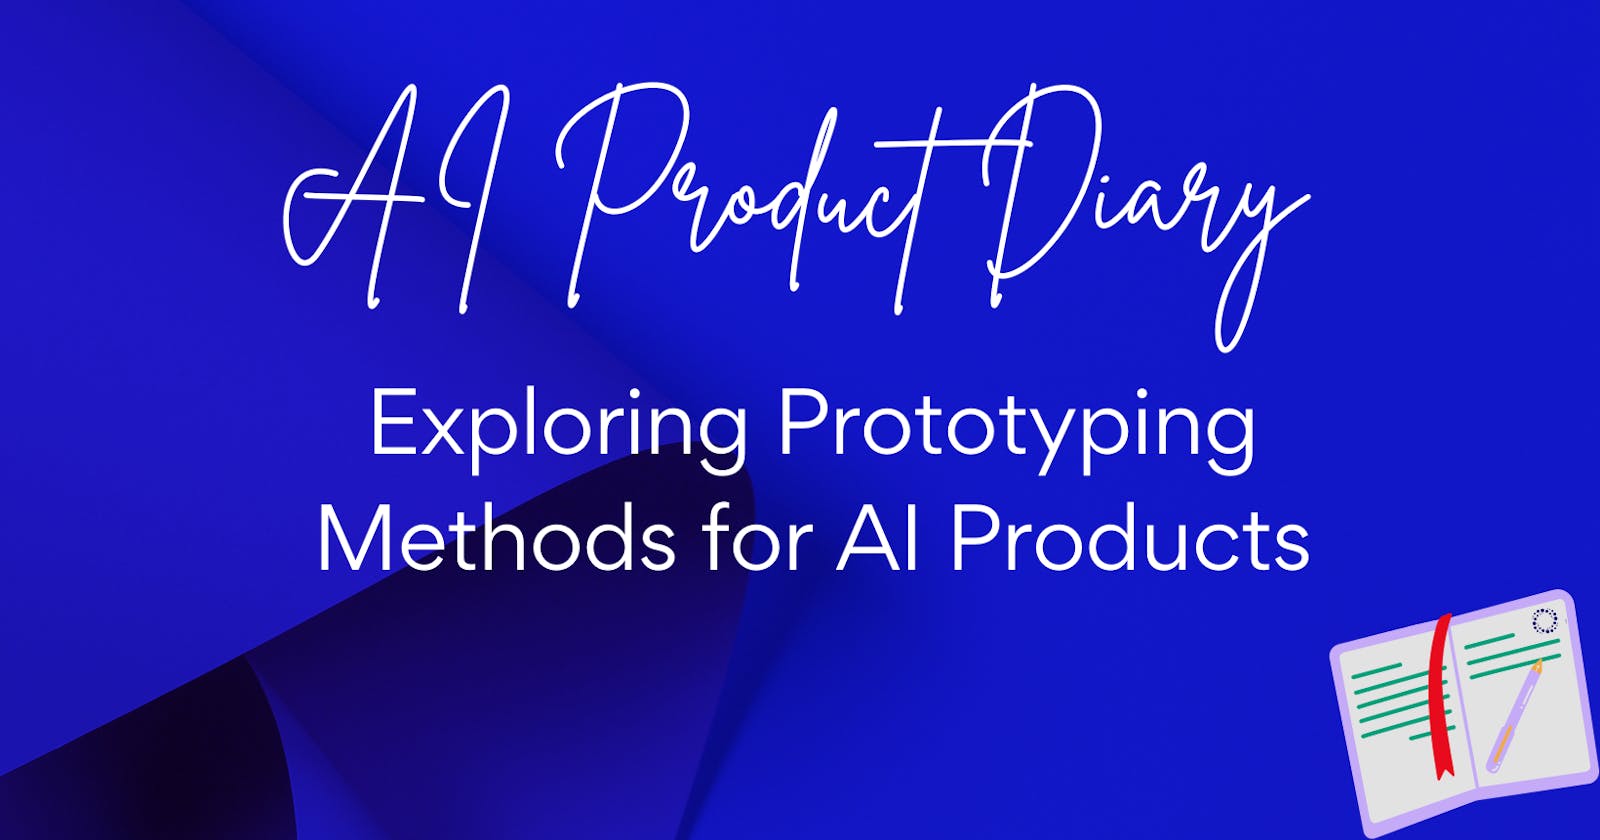 Exploring Prototyping Methods for AI Products: From Wireframes to Functional Models